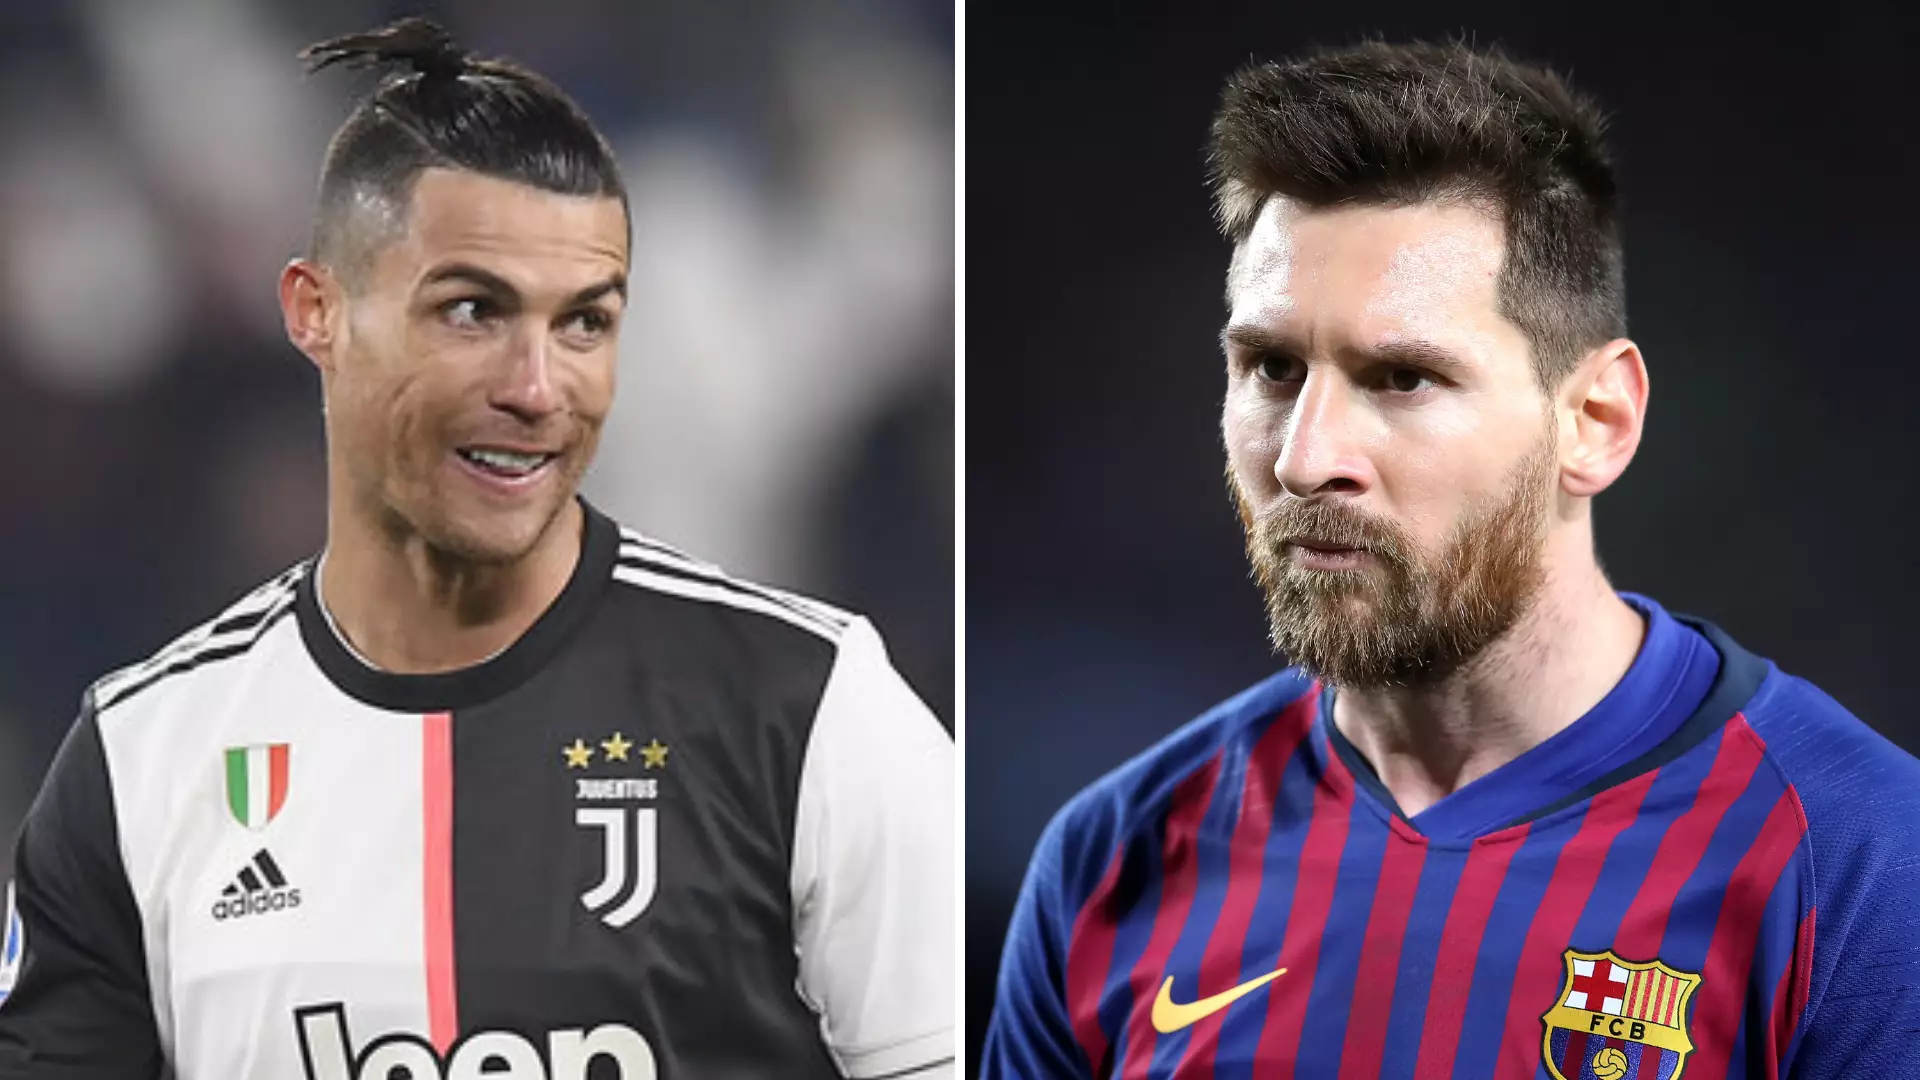 Lionel Messi Was Asked If He Would Pass To Cristiano Ronaldo If They Played Together